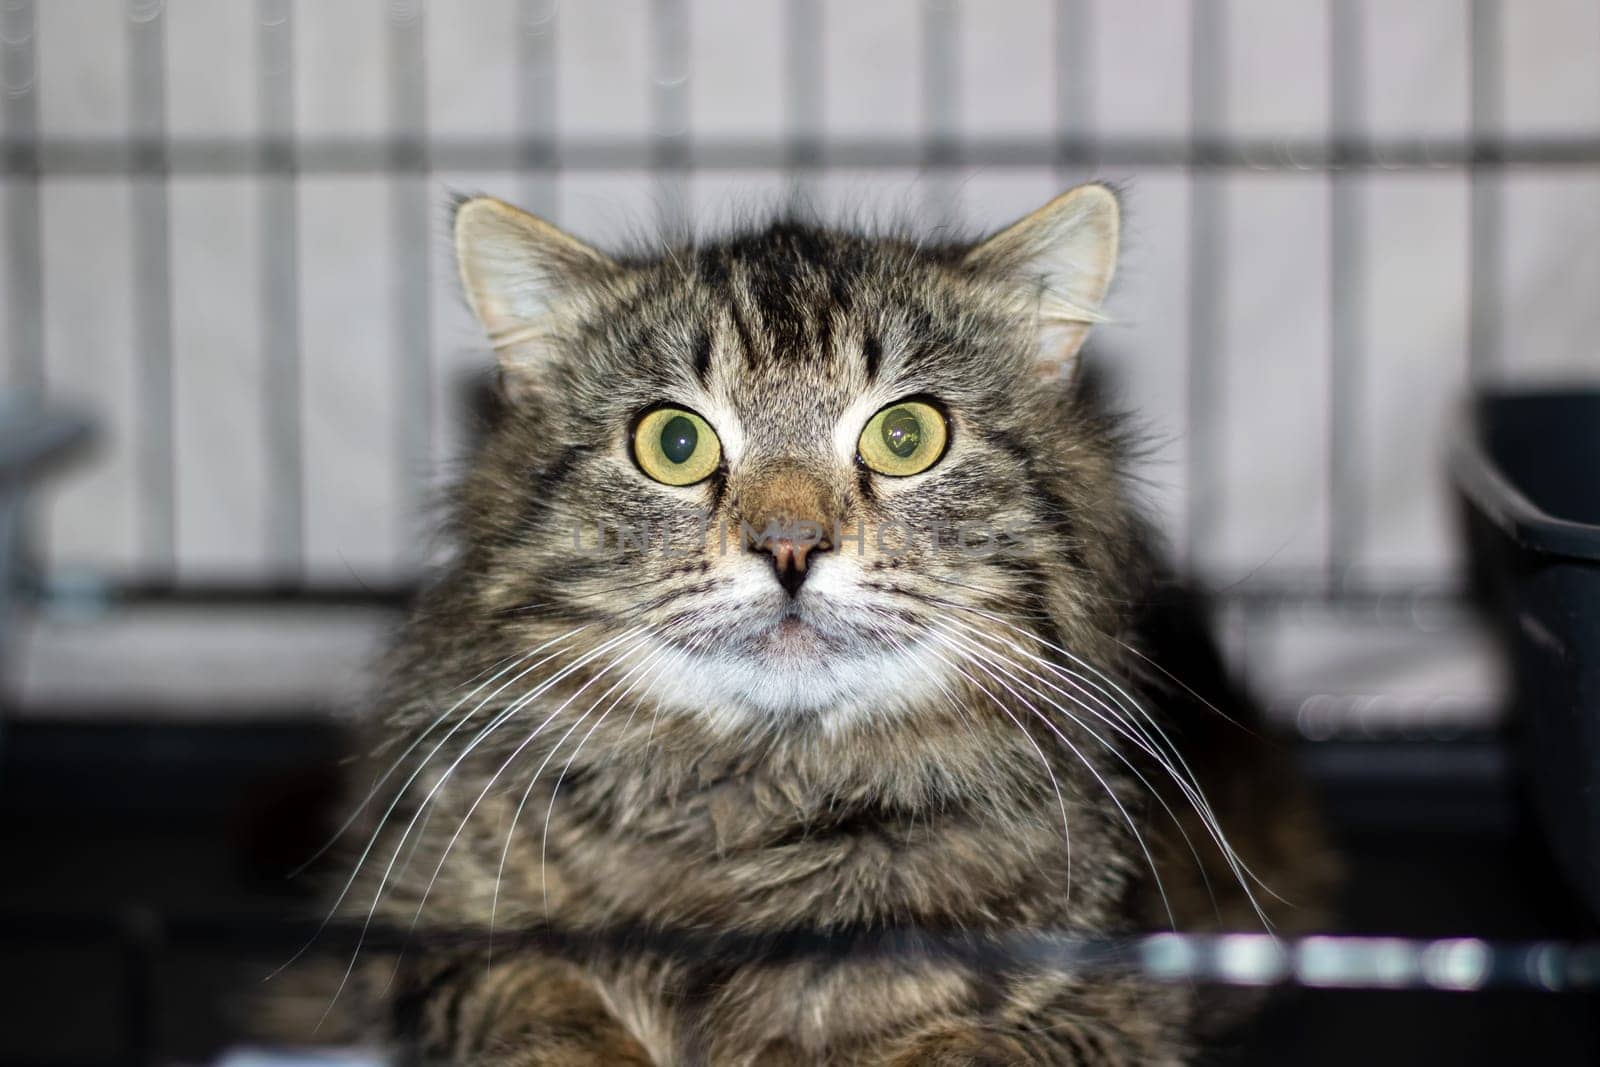 A domestic shorthaired cat, a small to mediumsized Felidae carnivore, is sitting in a cage, staring at the camera with its whiskers and fur visible